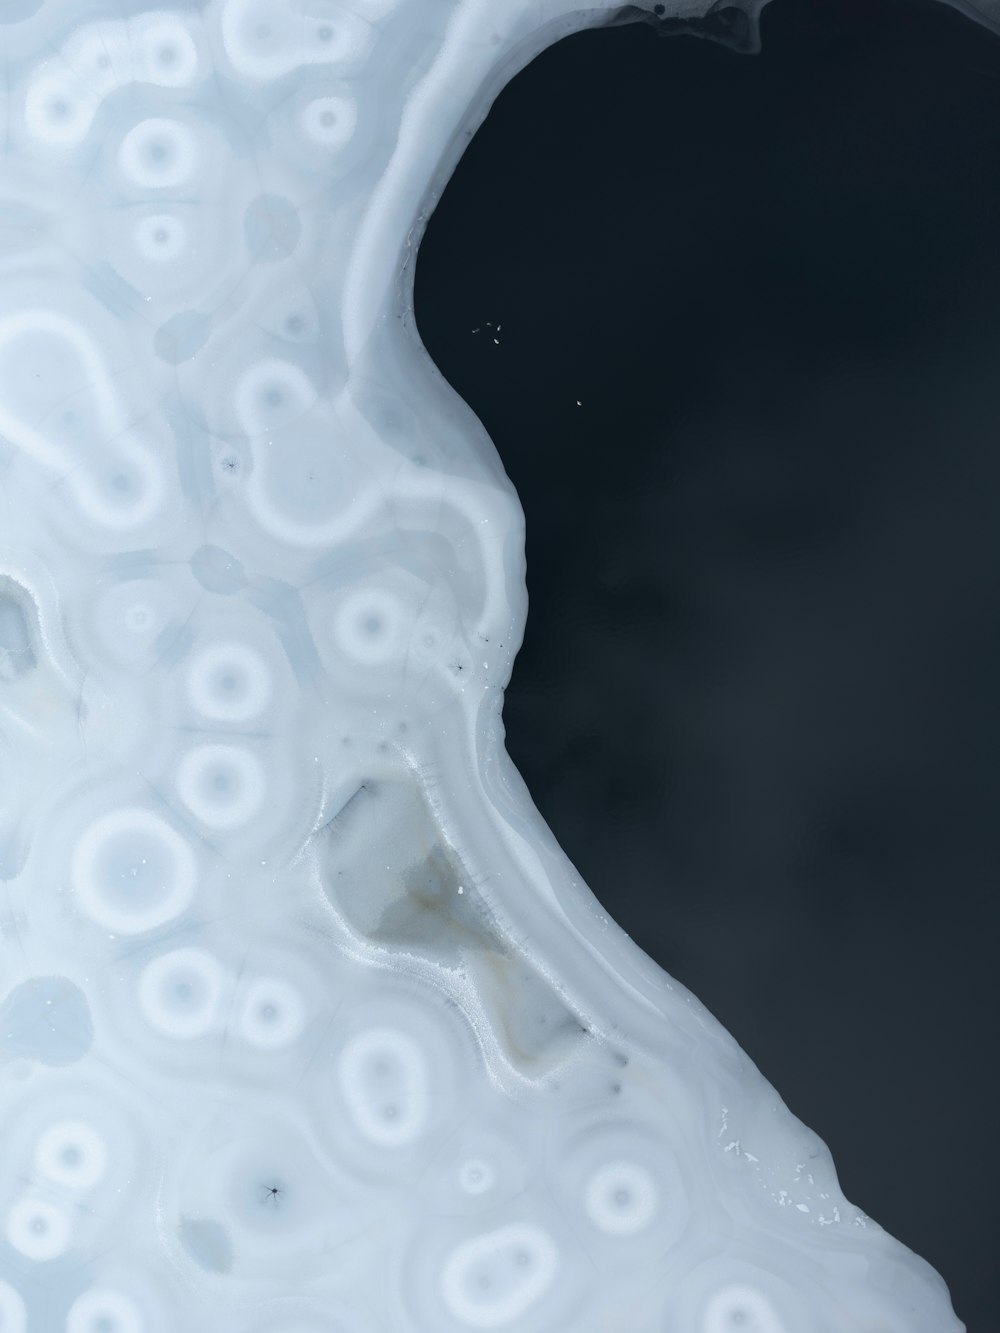 a close up of a white substance with a black background